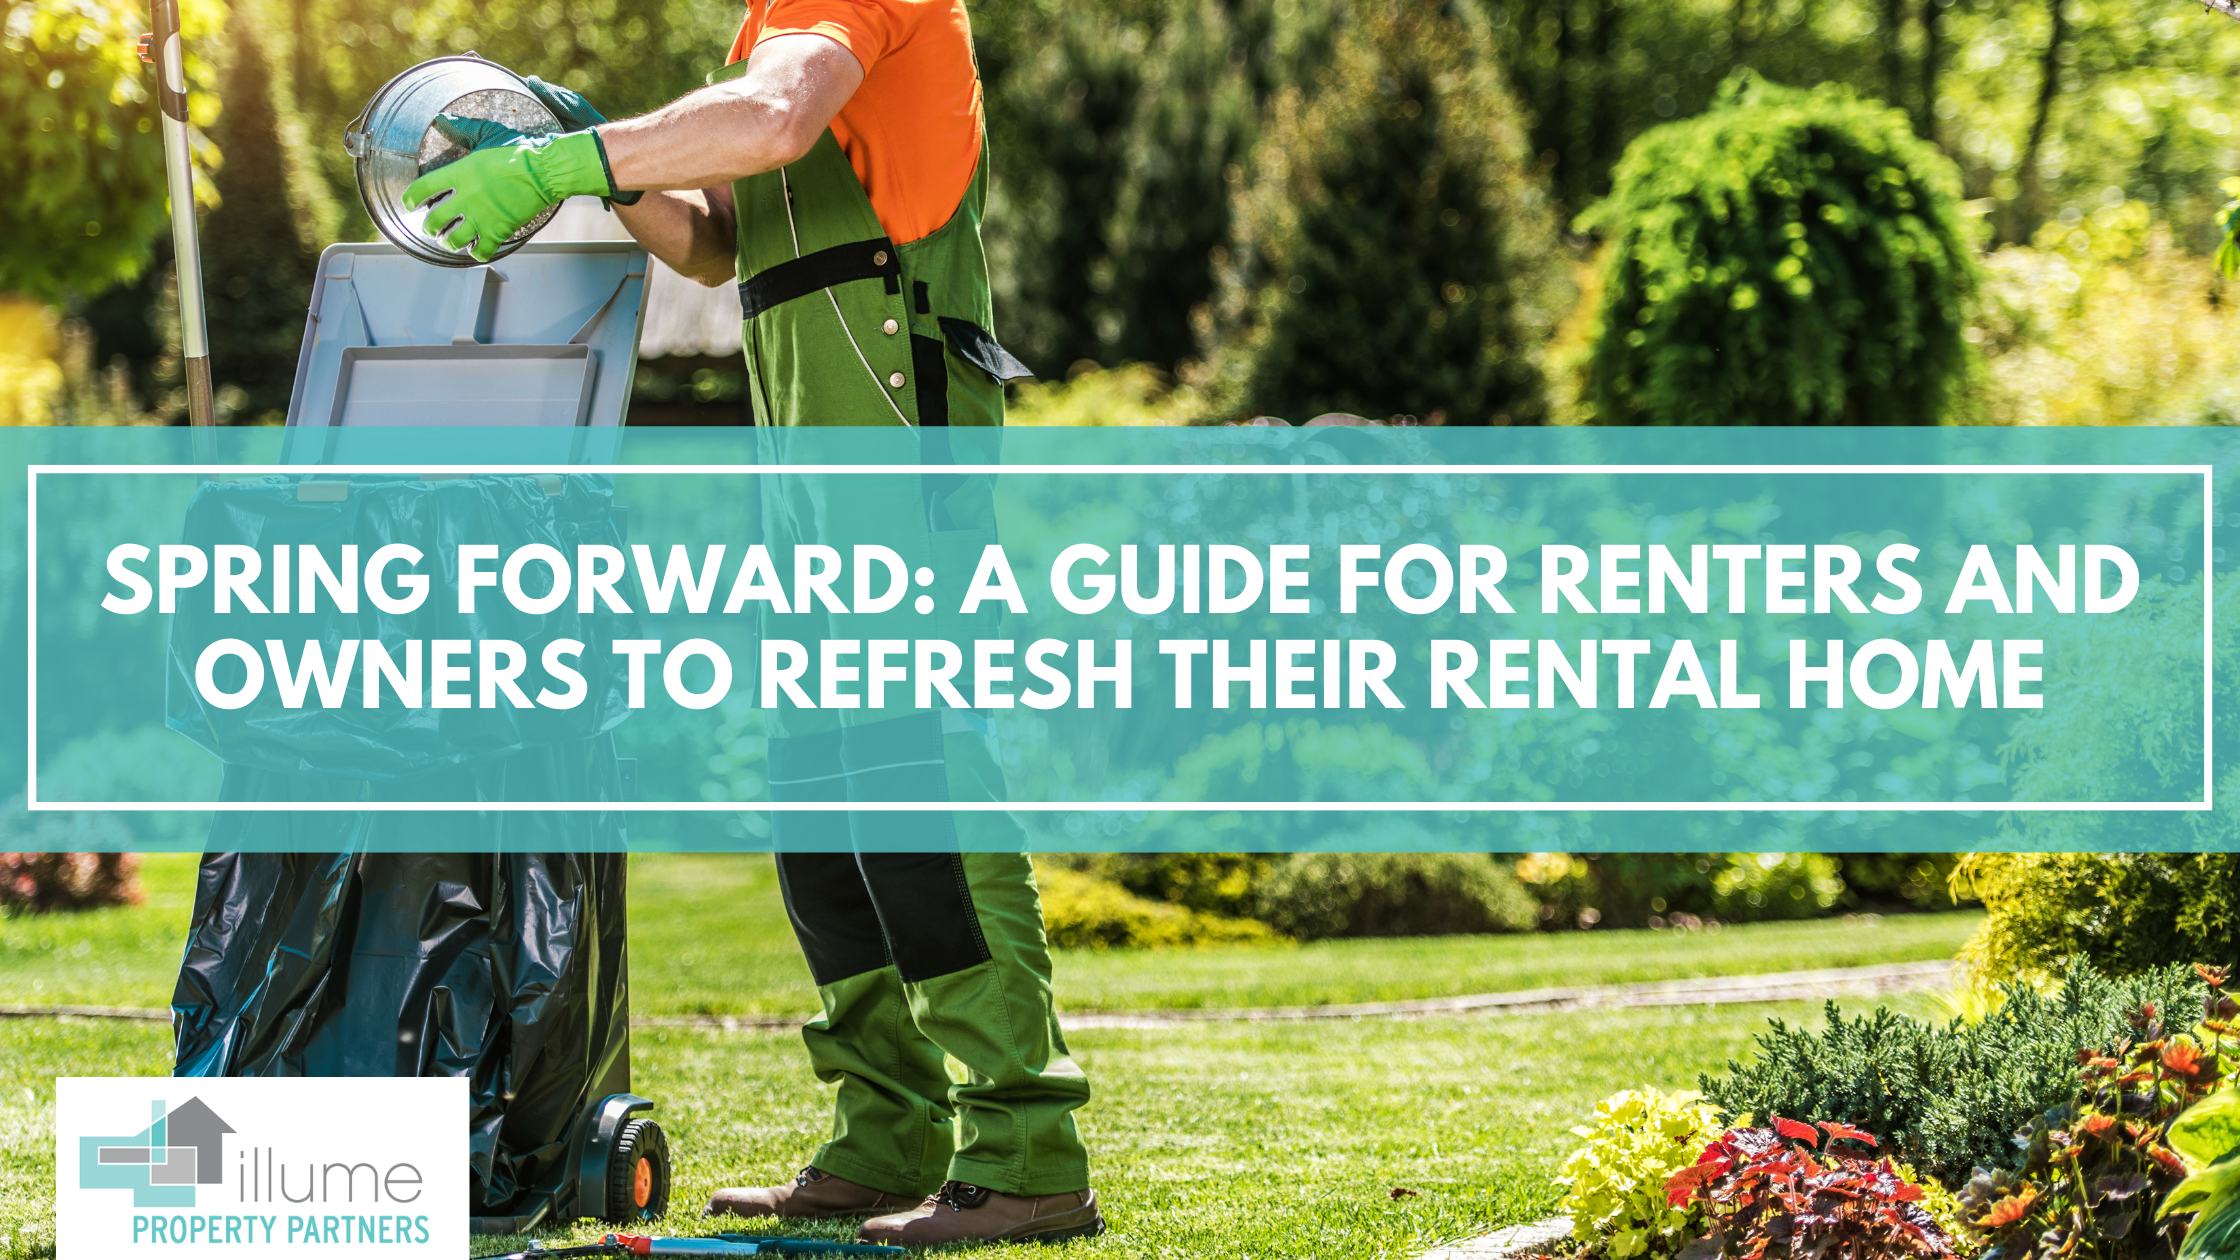 Spring Forward: A Guide for Renters and Owners to Refresh Their Rental Home